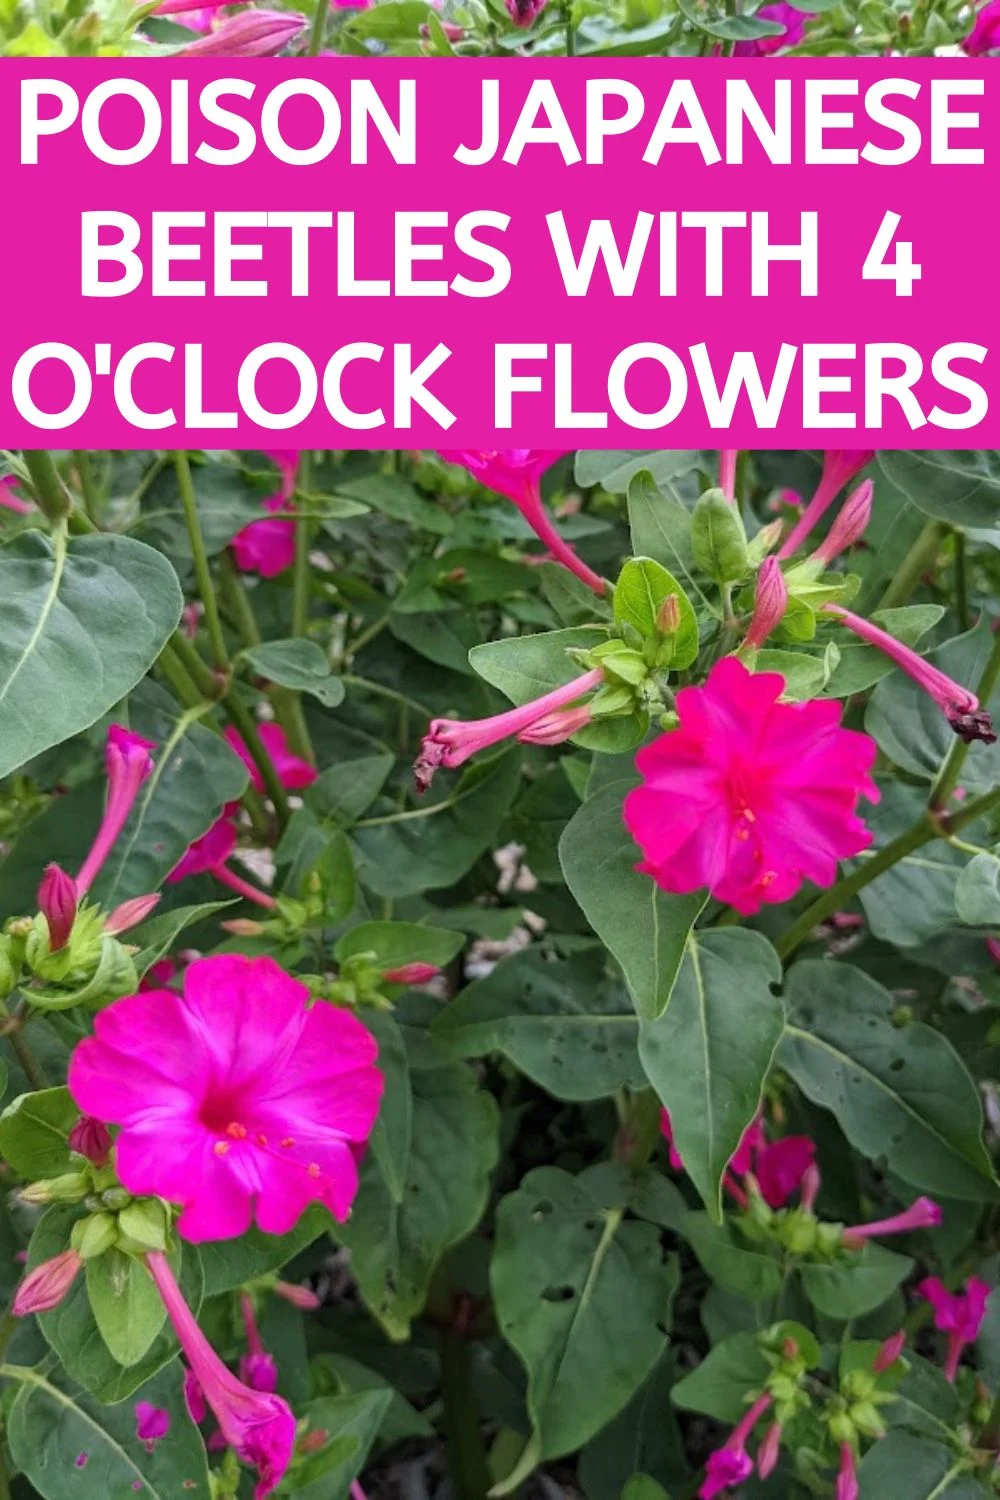 poison Japanese beetles with 4 o'clock flowers